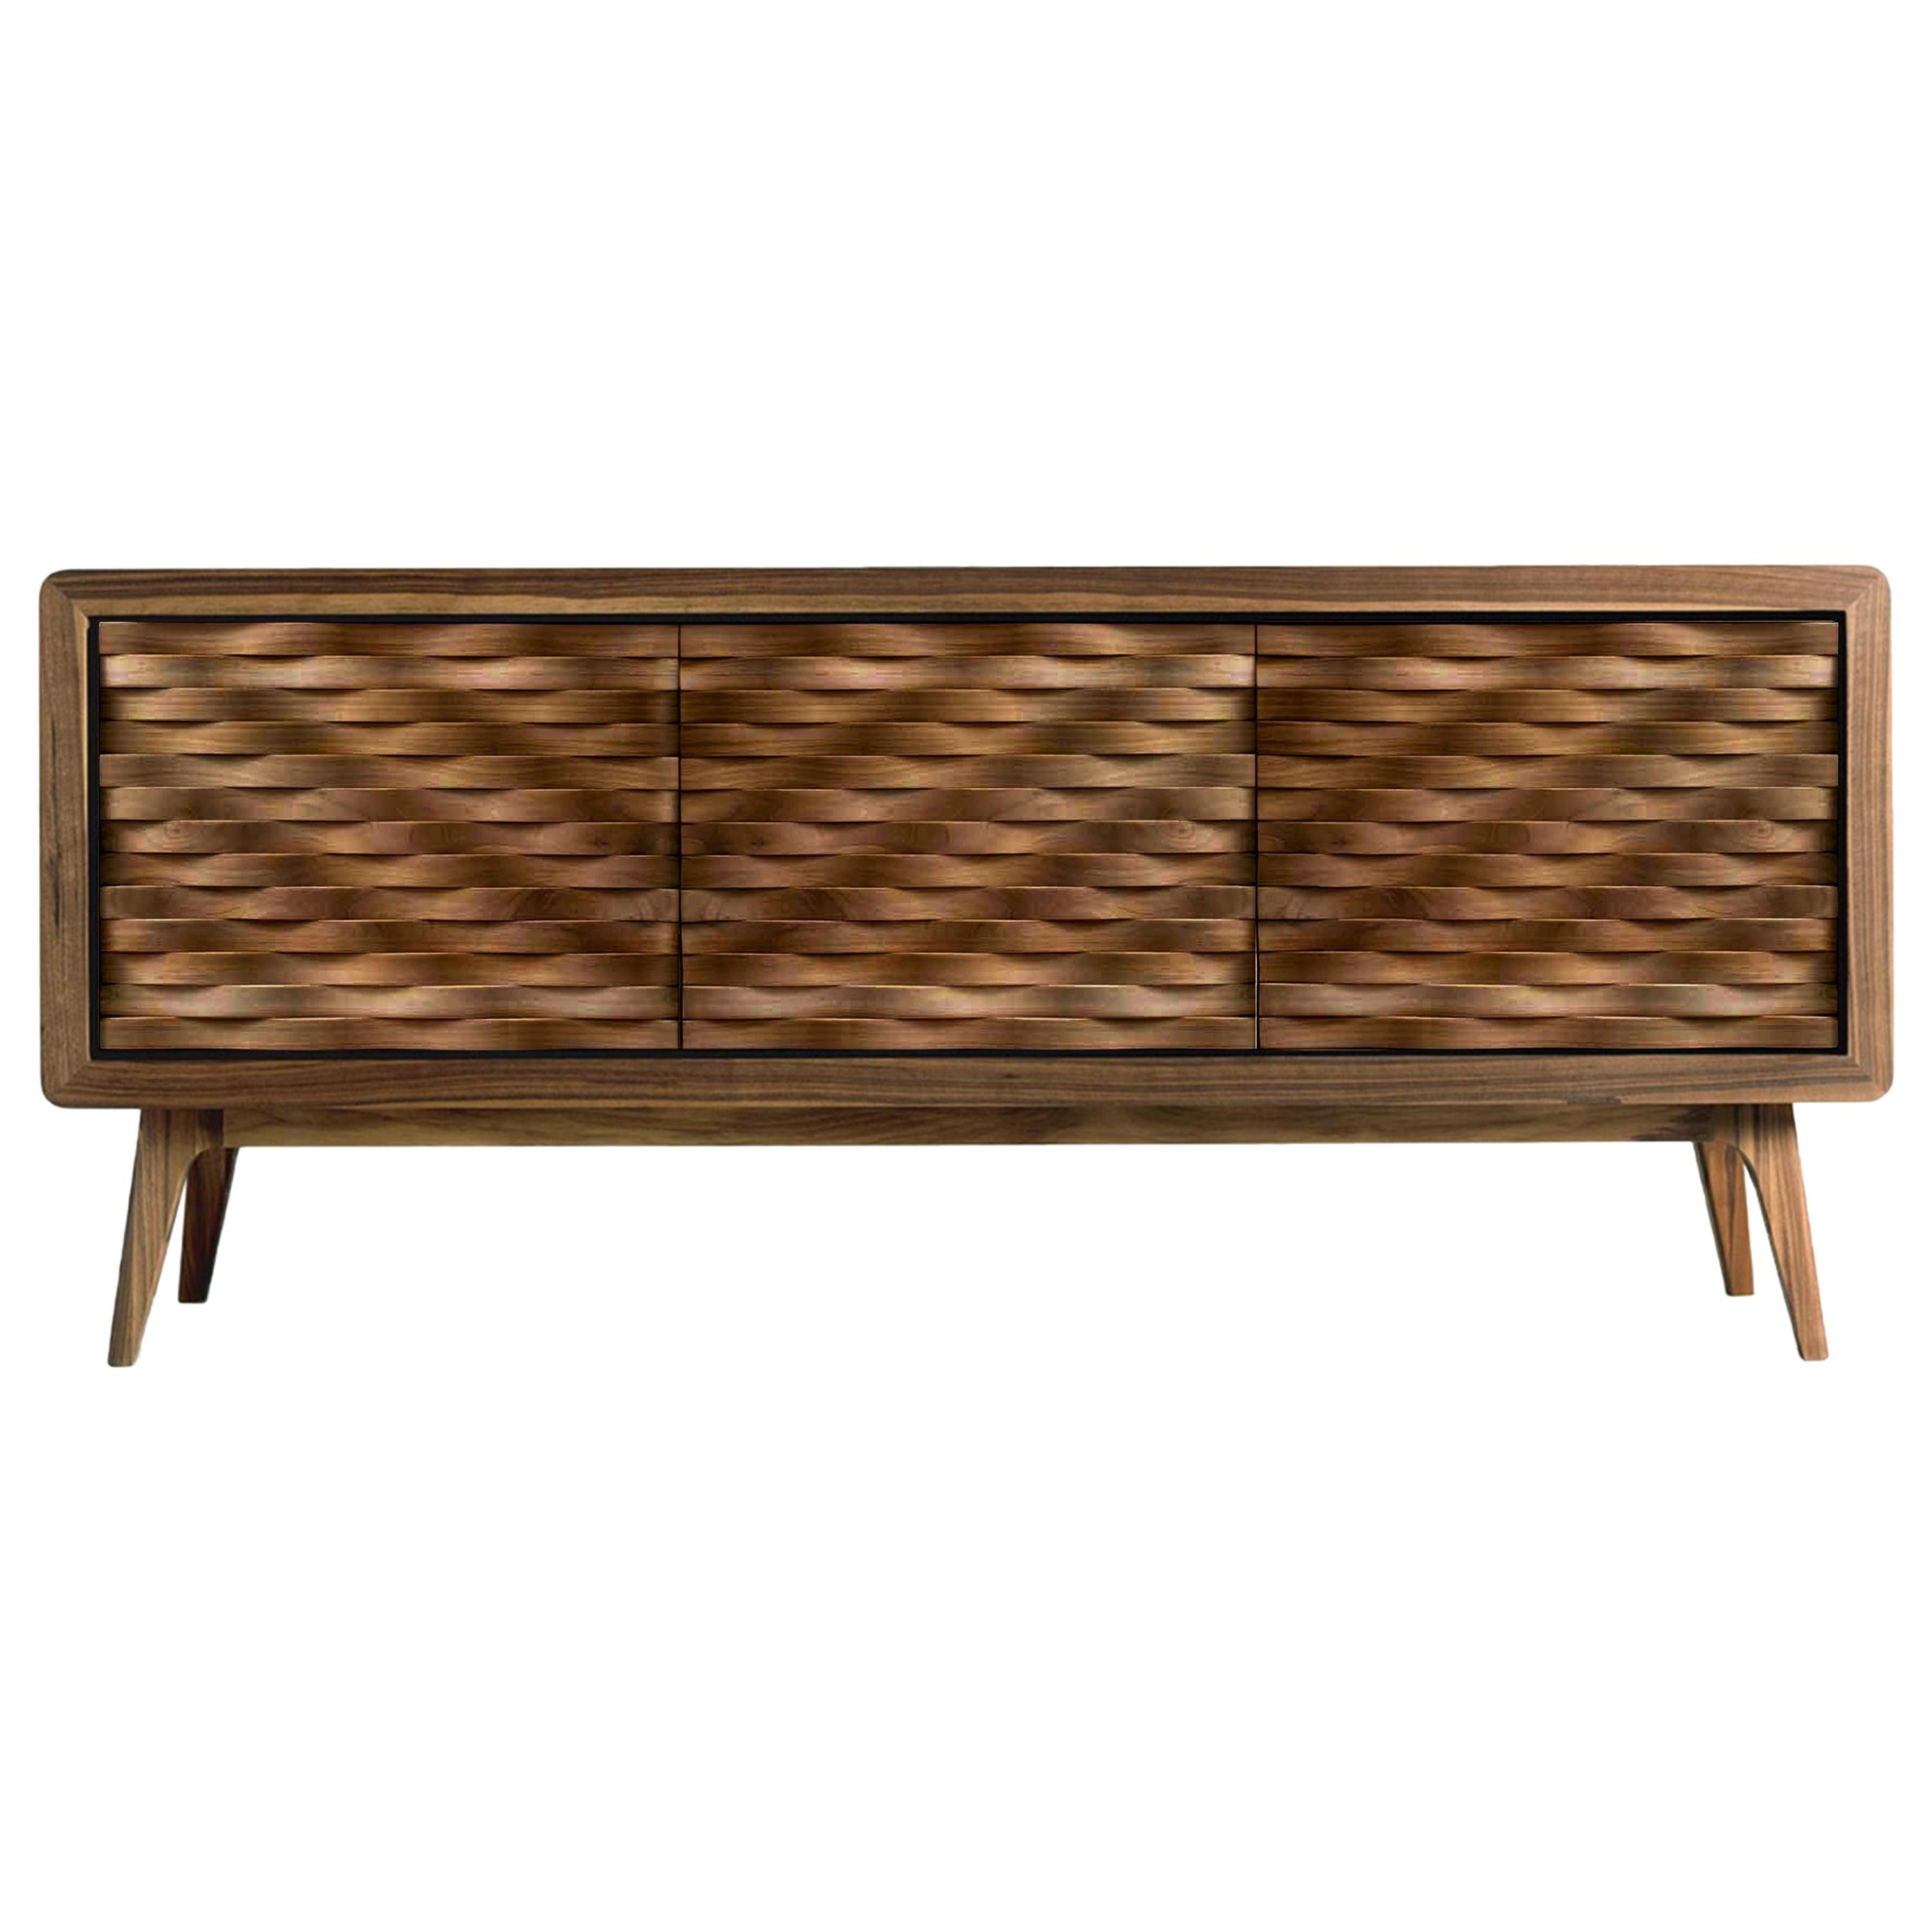 Artes Nastro Solid Wood Sideboard, Walnut Natural Finish, Contemporary